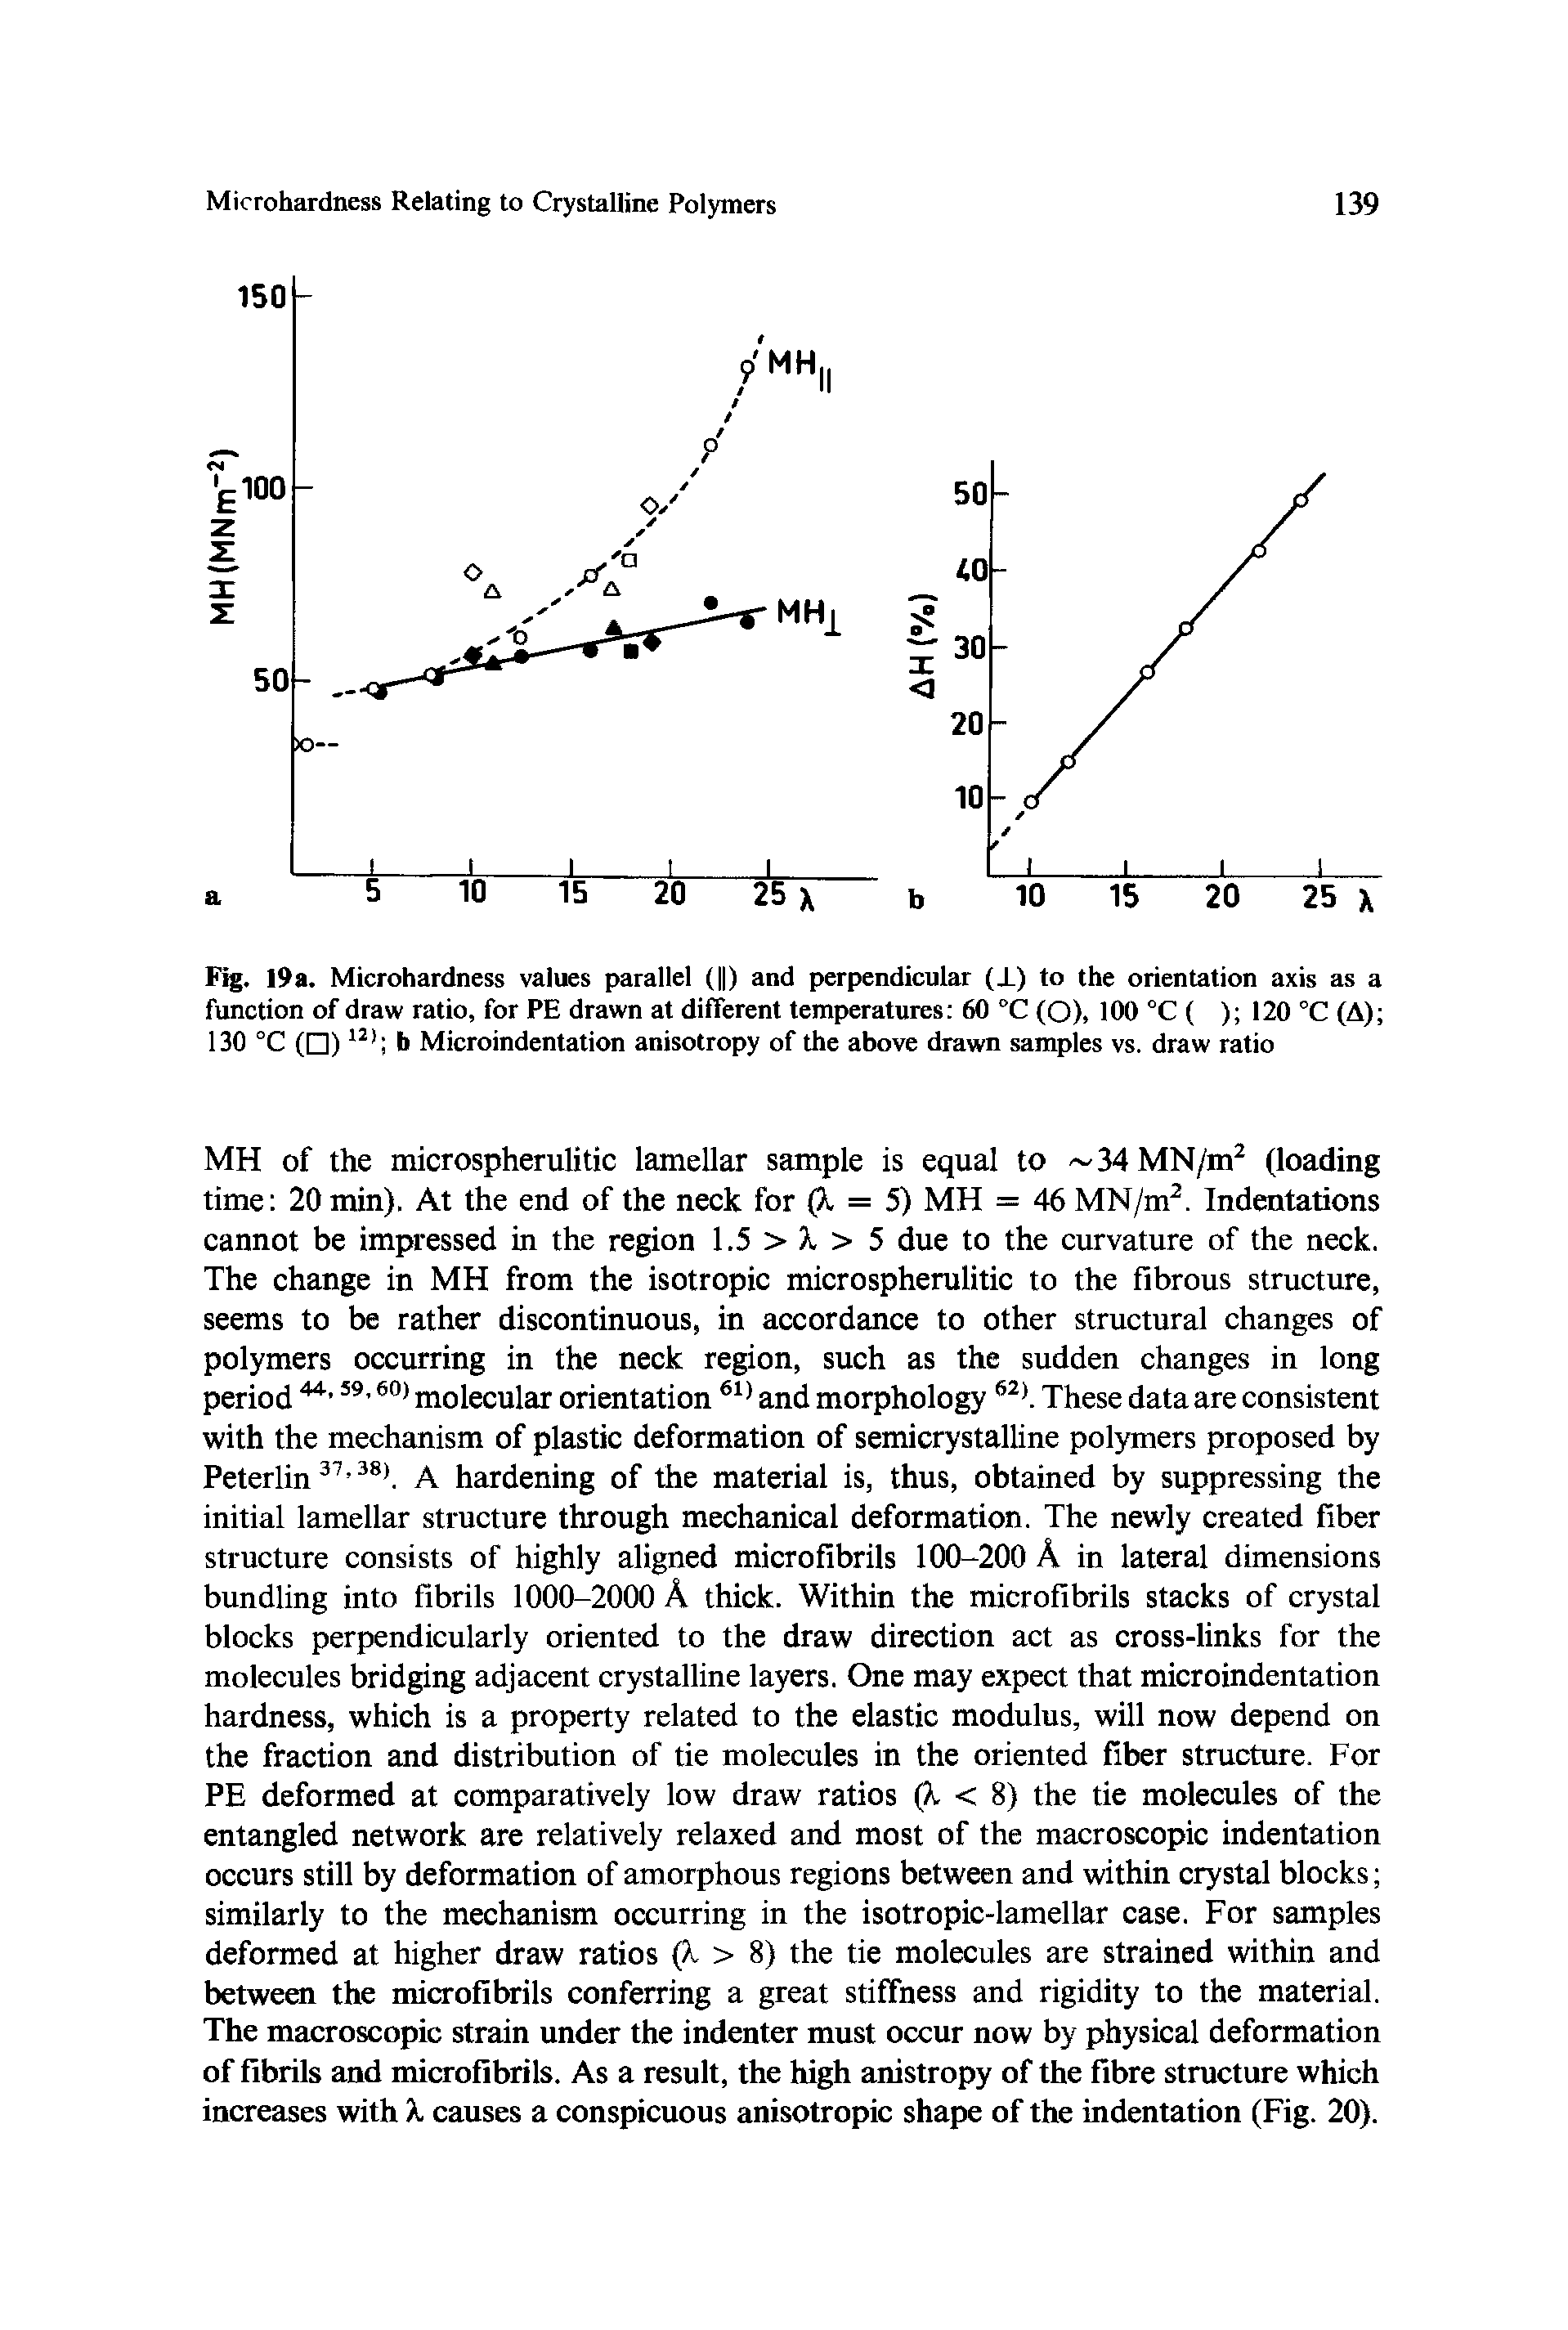 Fig. 19a. Microhardness values parallel ( ) and perpendicular (X) to the orientation axis as a function of draw ratio, for PE drawn at different temperatures 60 °C (O), 100 °C ( ) 120 °C (A) 130 °C ( )12 b Microindentation anisotropy of the above drawn samples vs. draw ratio...